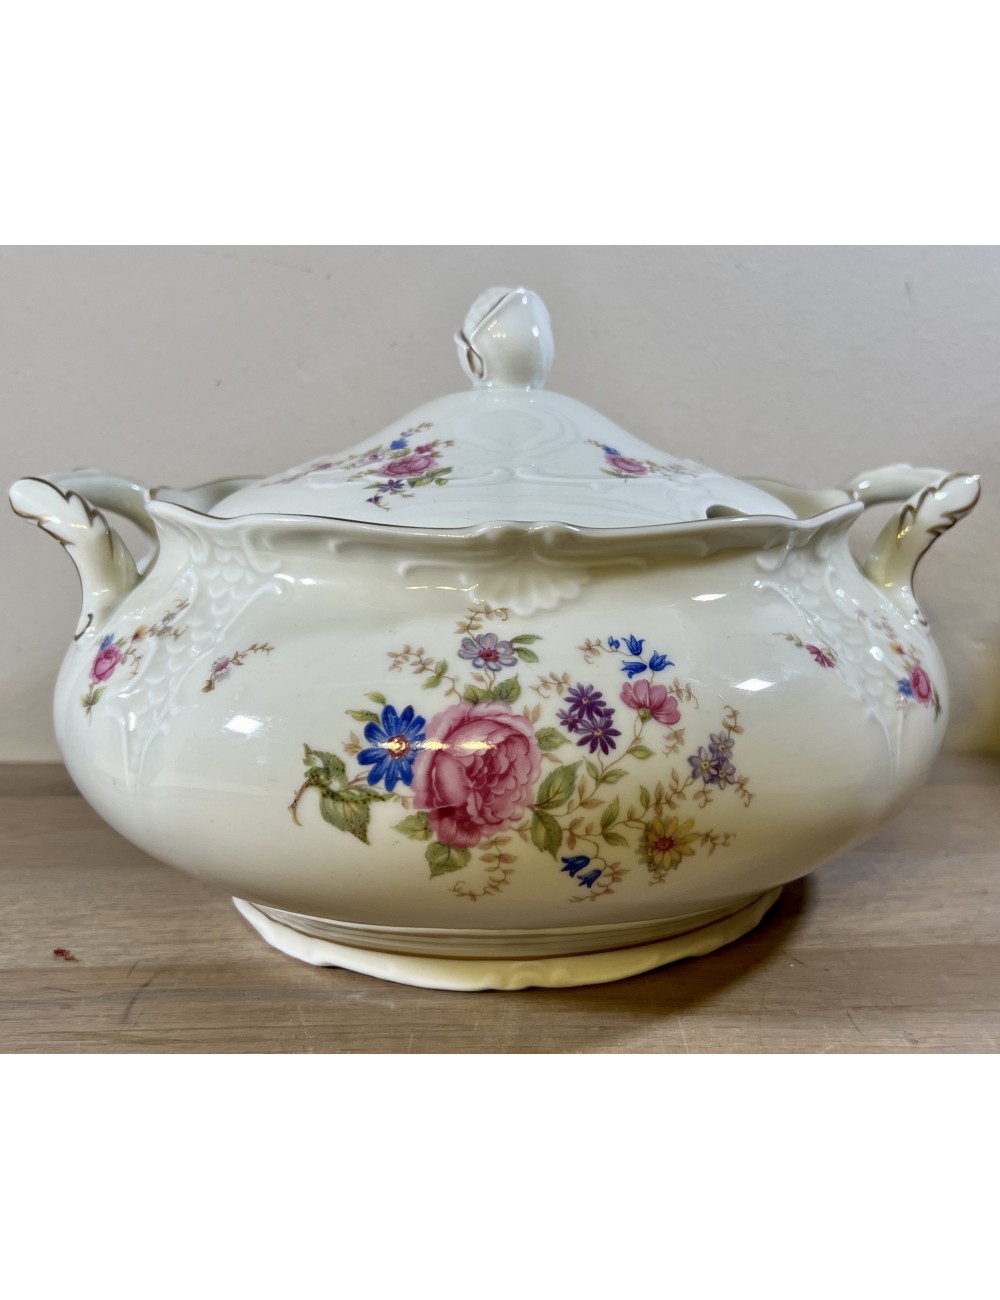 Tureen / Soup tureen - larger model - Mosa - décor in blue/pink flowers